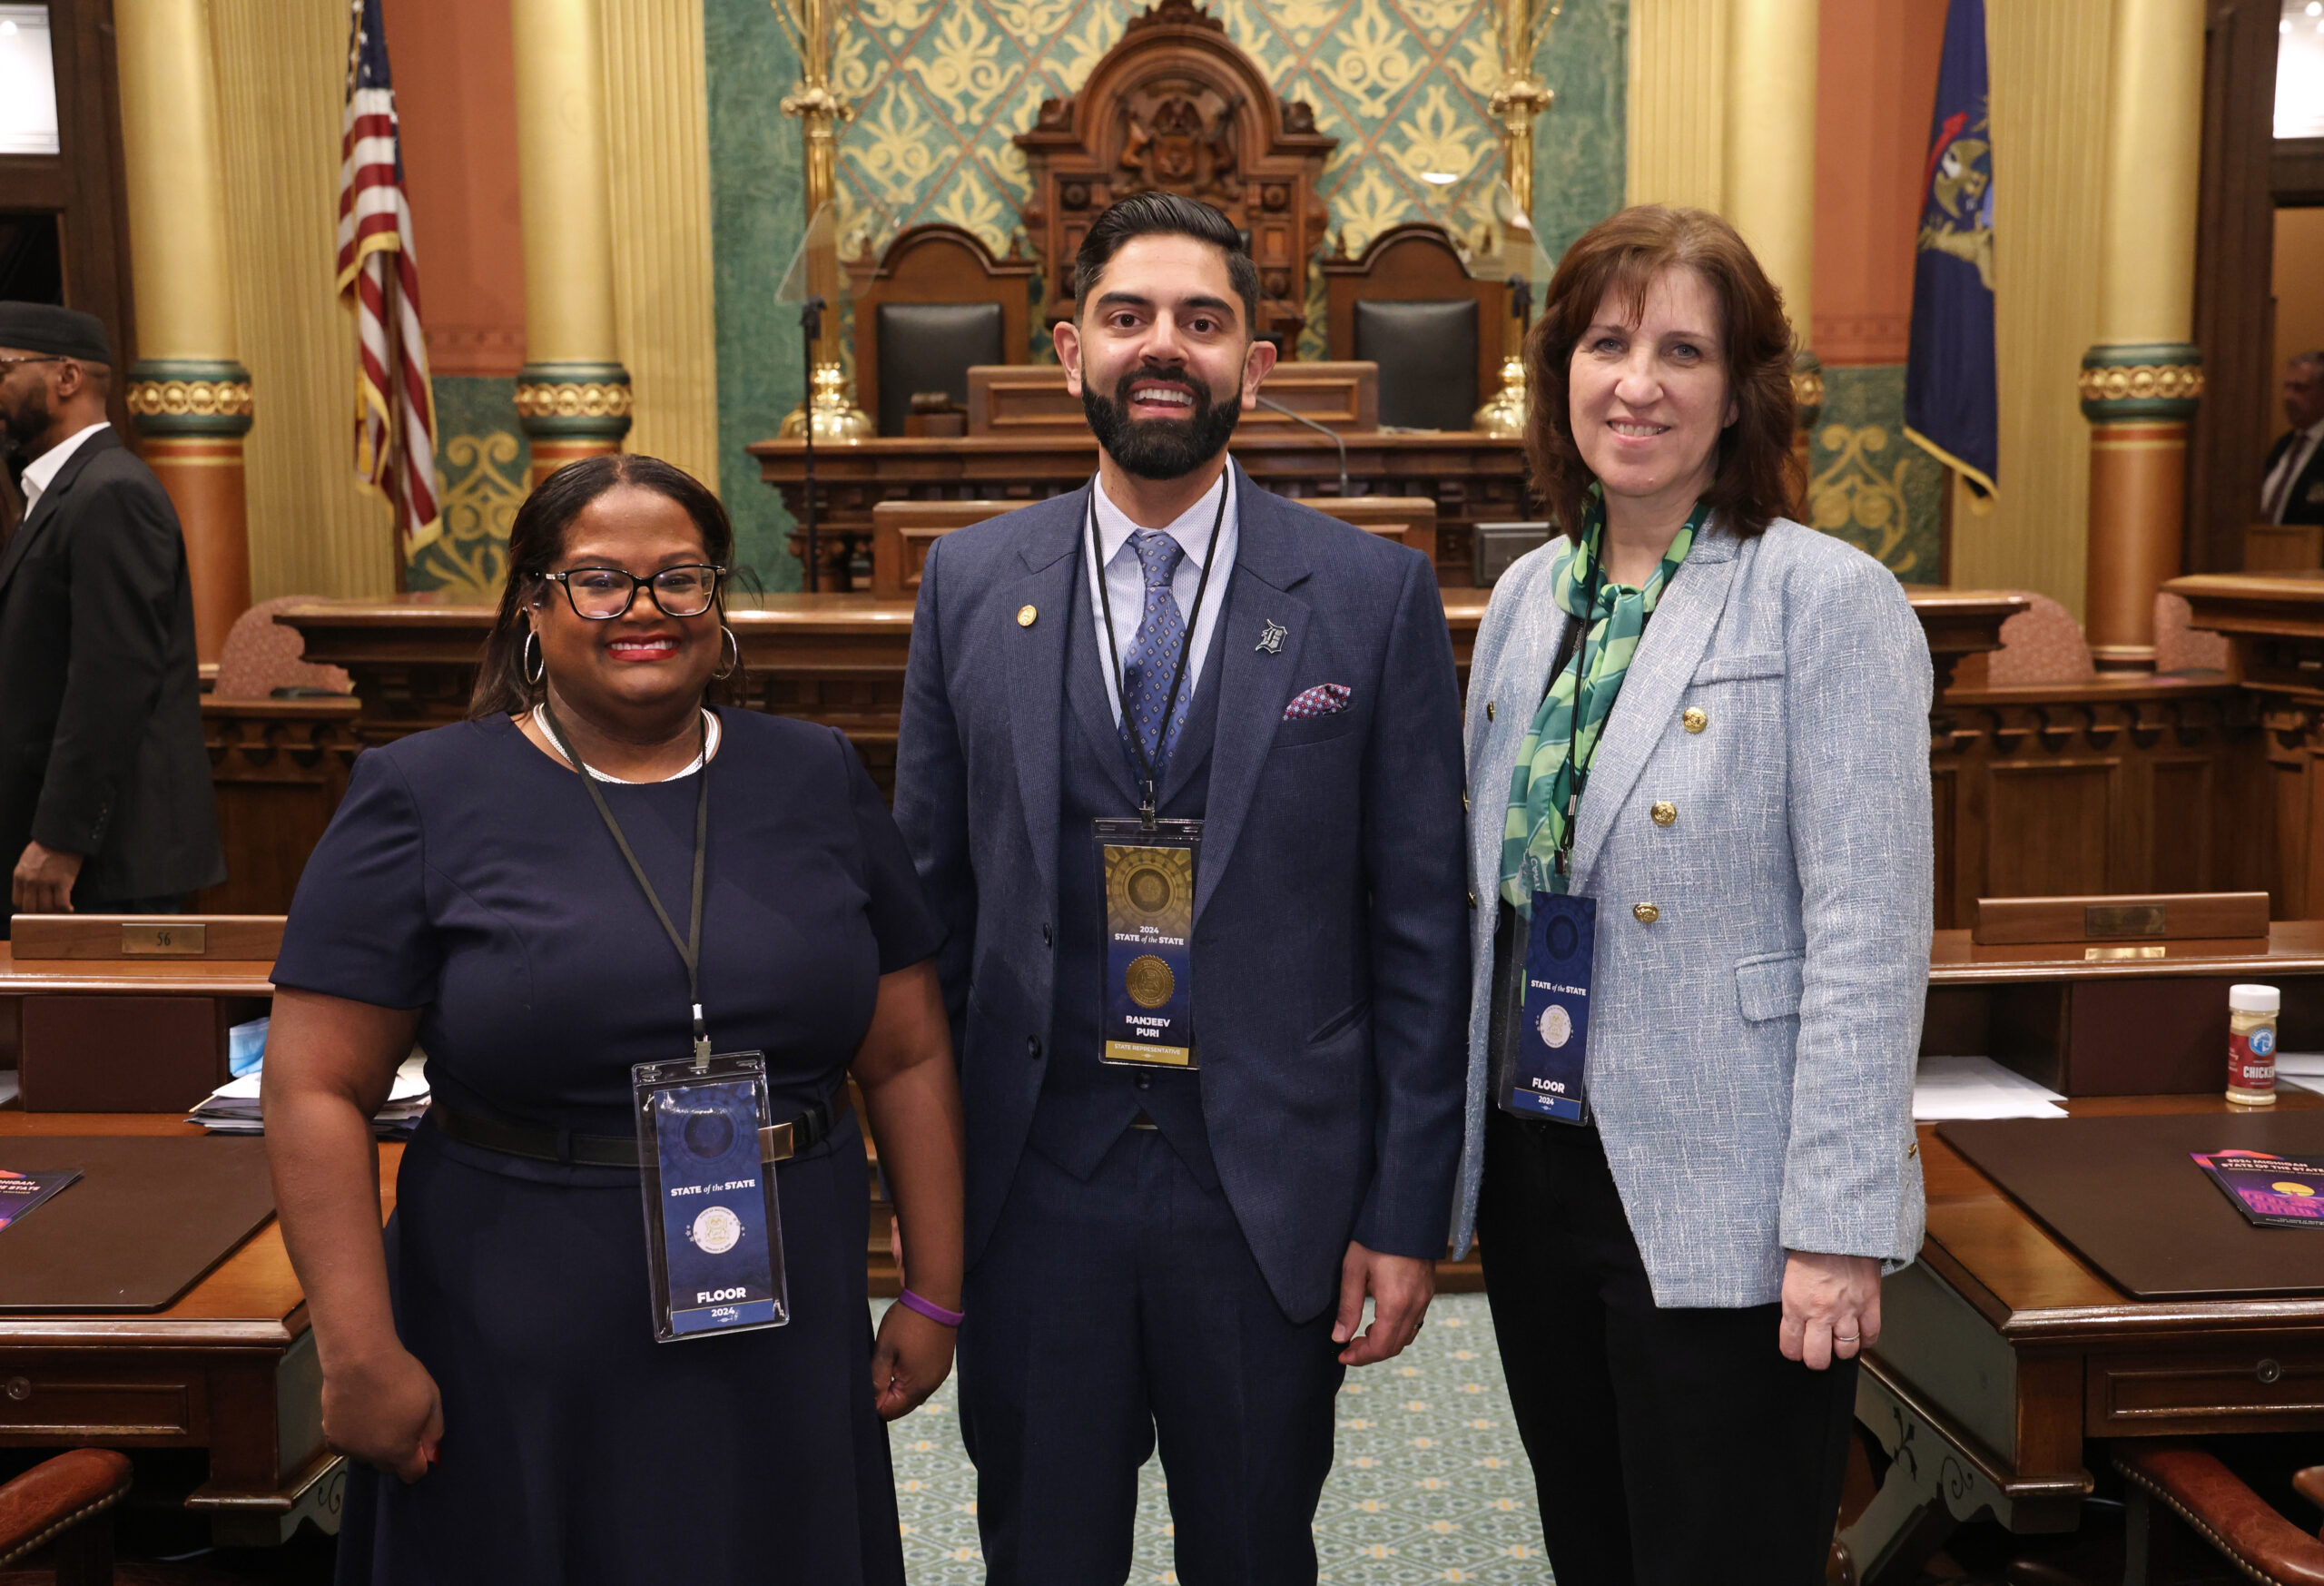 Rep. Puri stands with Canton Township Trustee Sommer Foster and Canton Township Supervisor Anne Marie Graham-Hudak on the Michigan House of Representatives Floor.